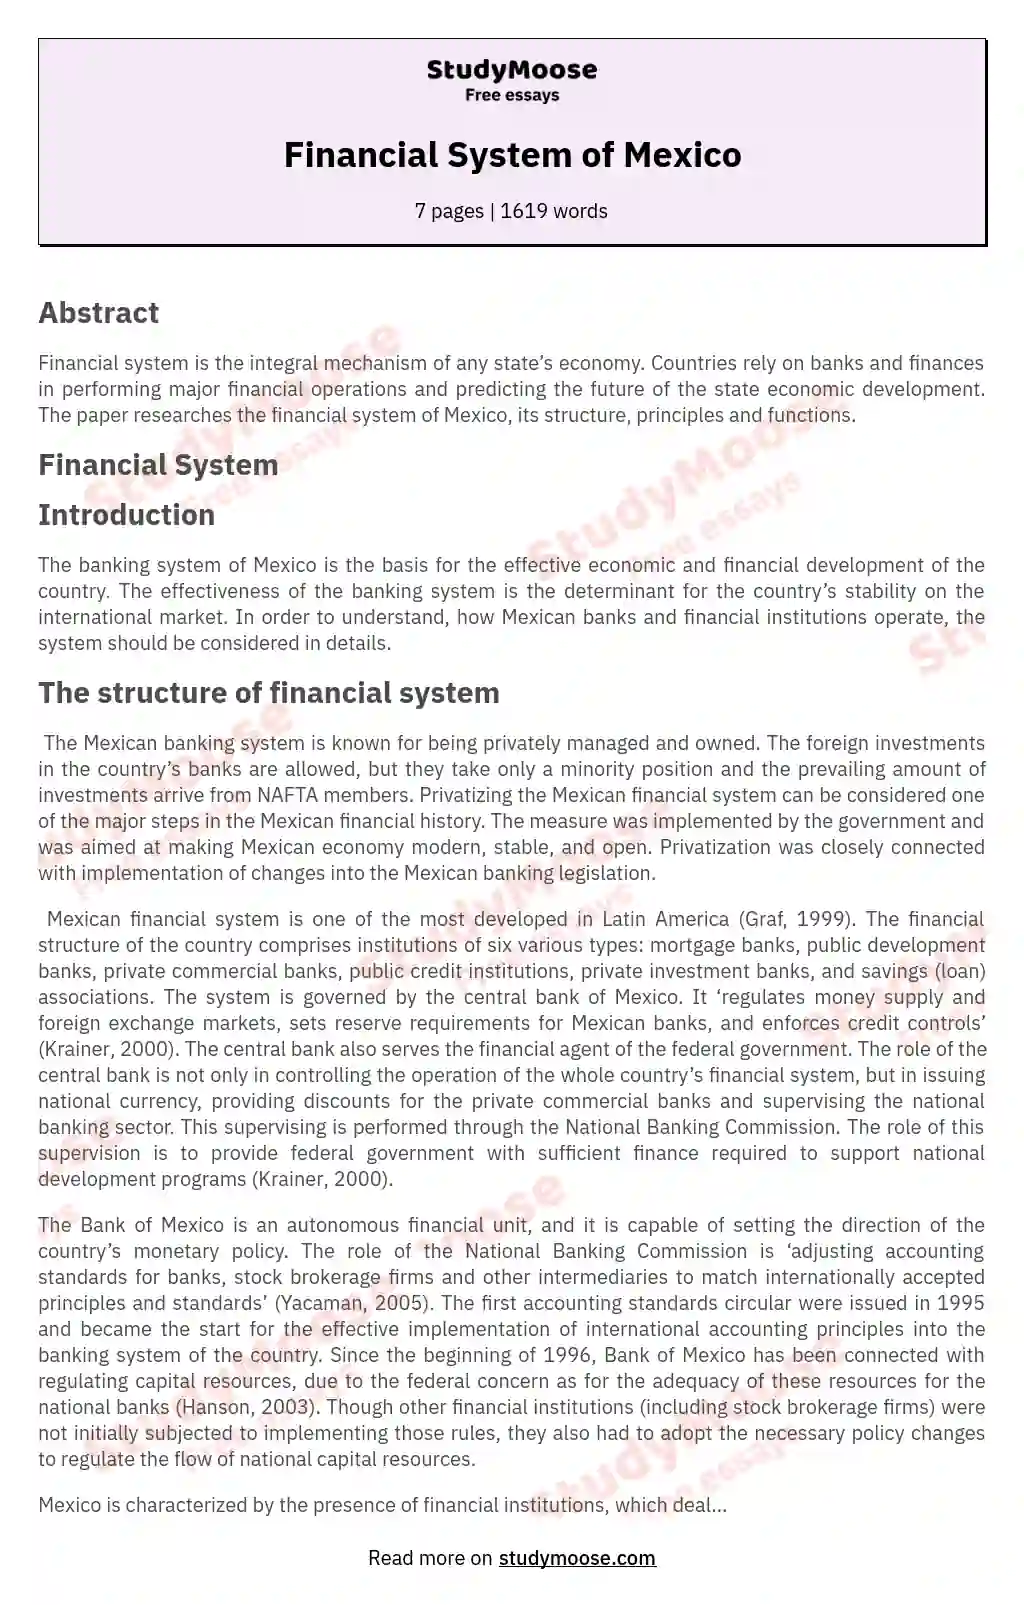 Financial System of Mexico essay